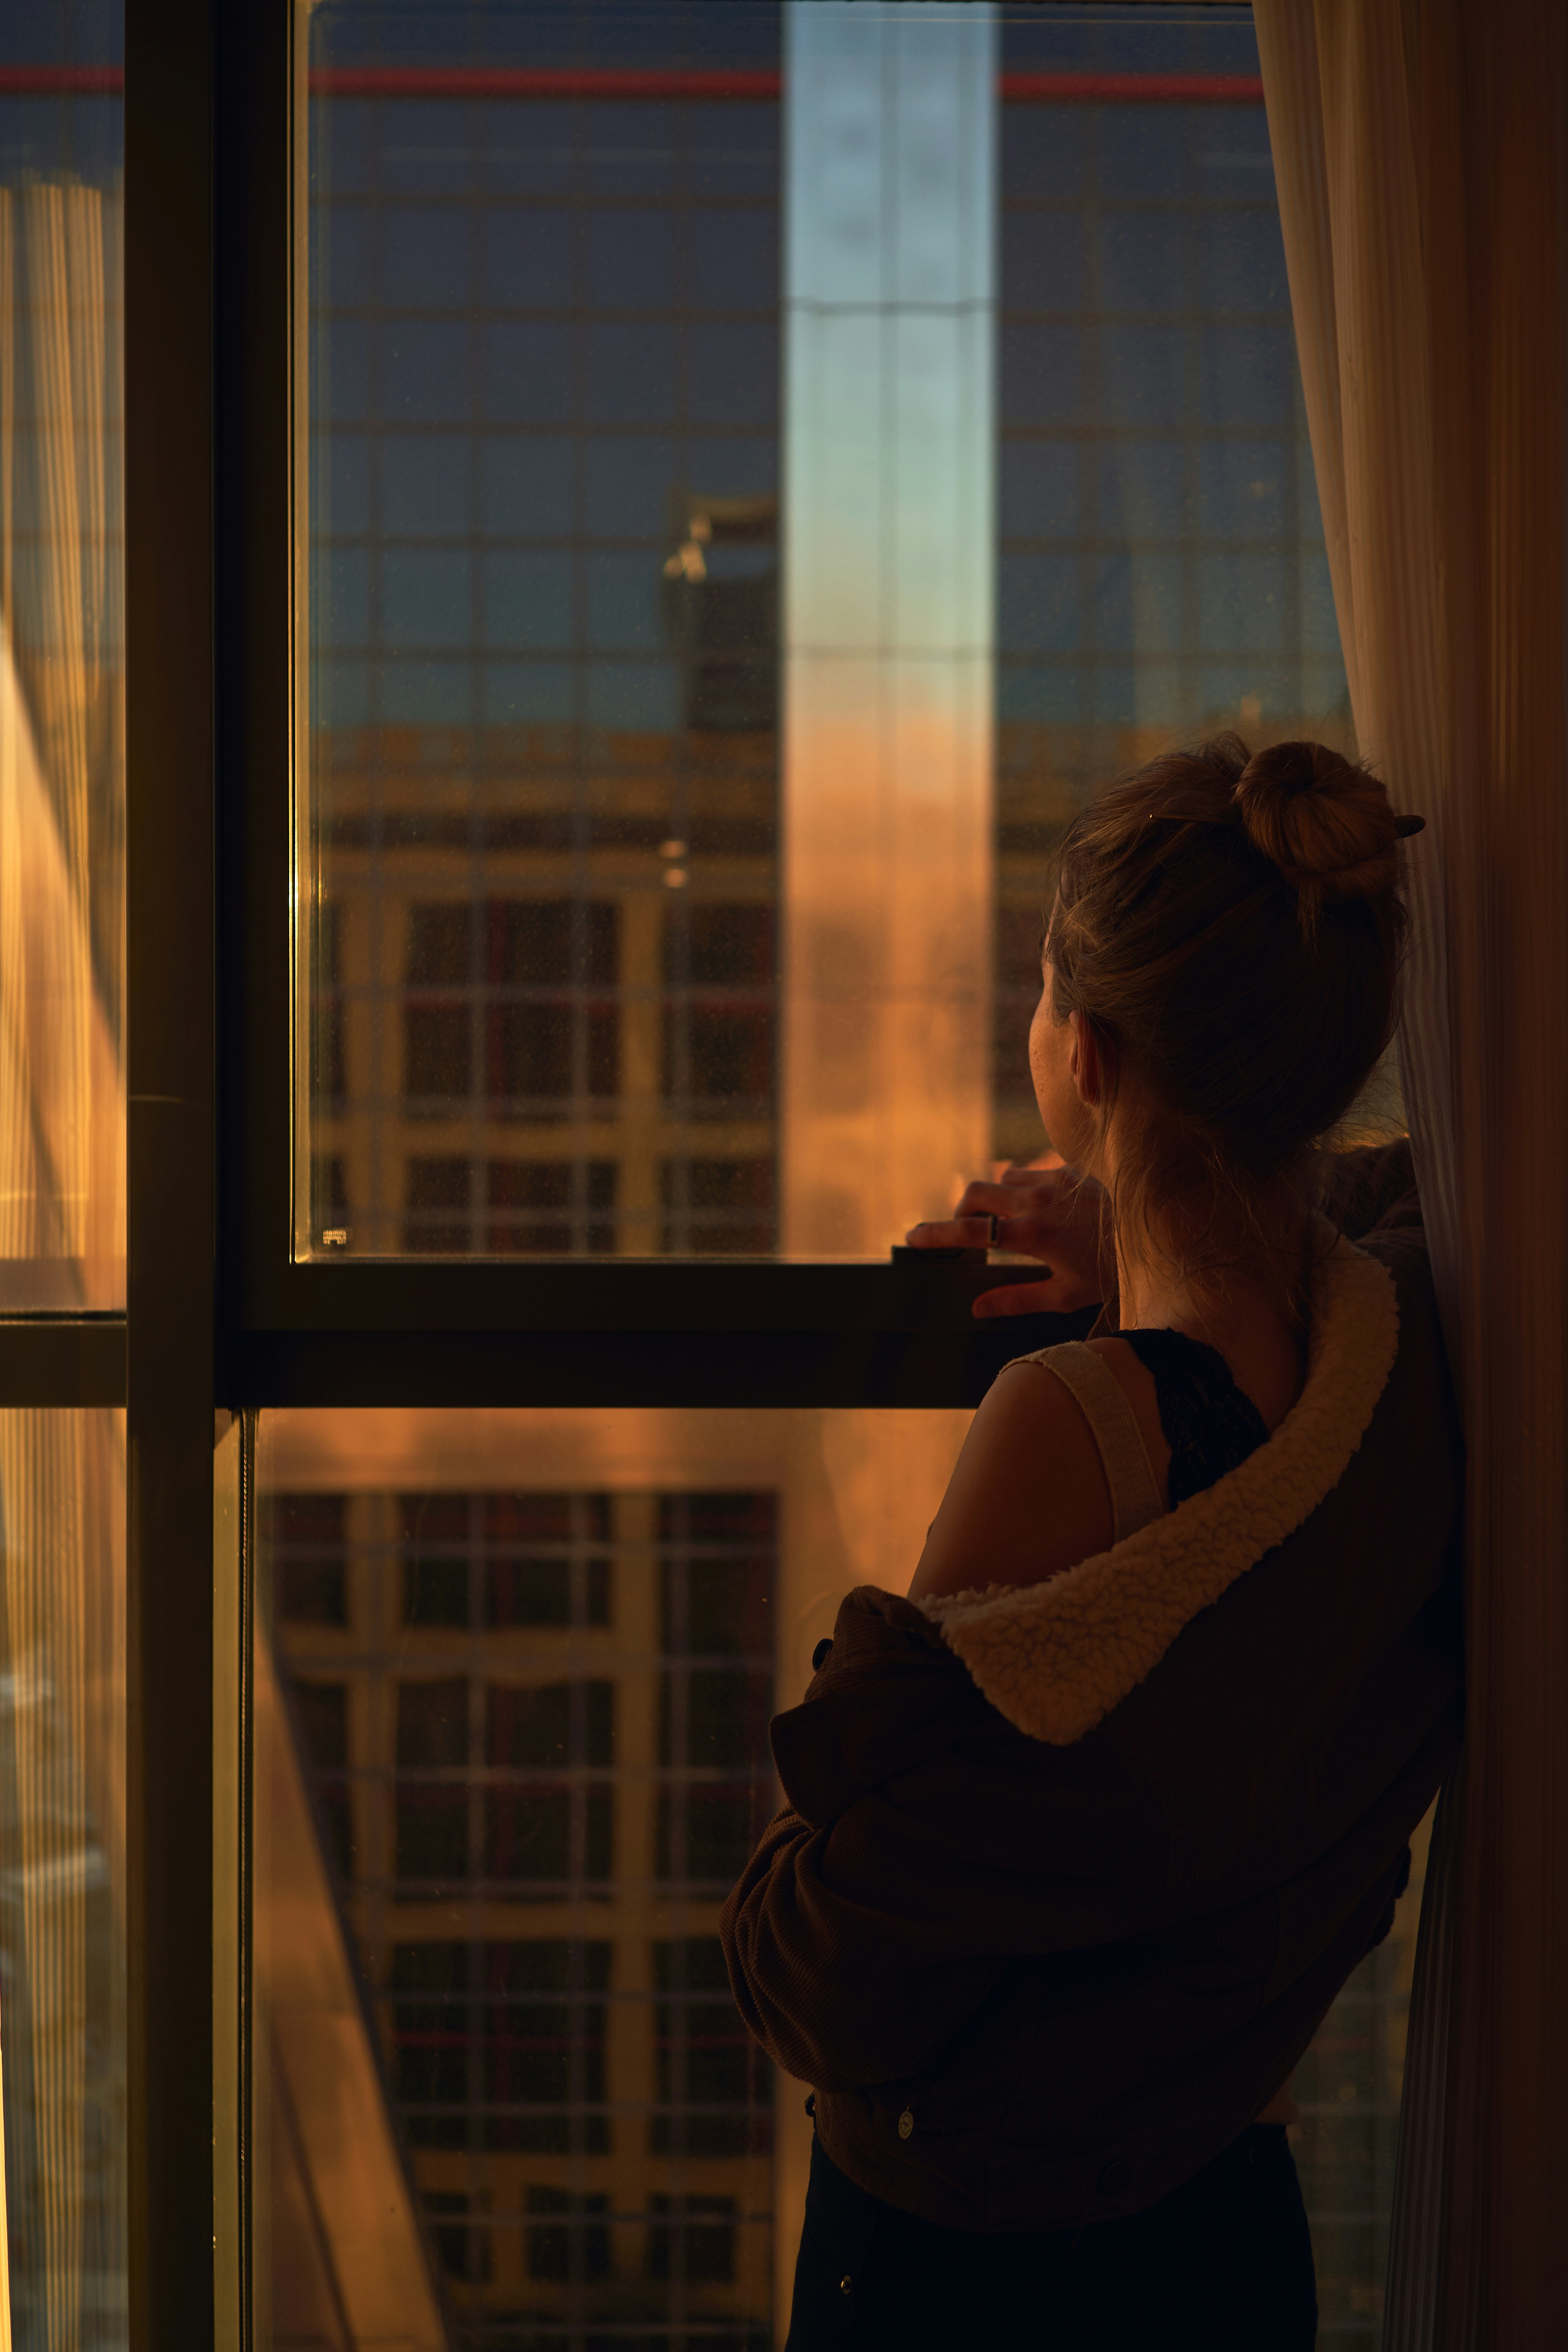 A woman looking through the hotel window on the golden hour